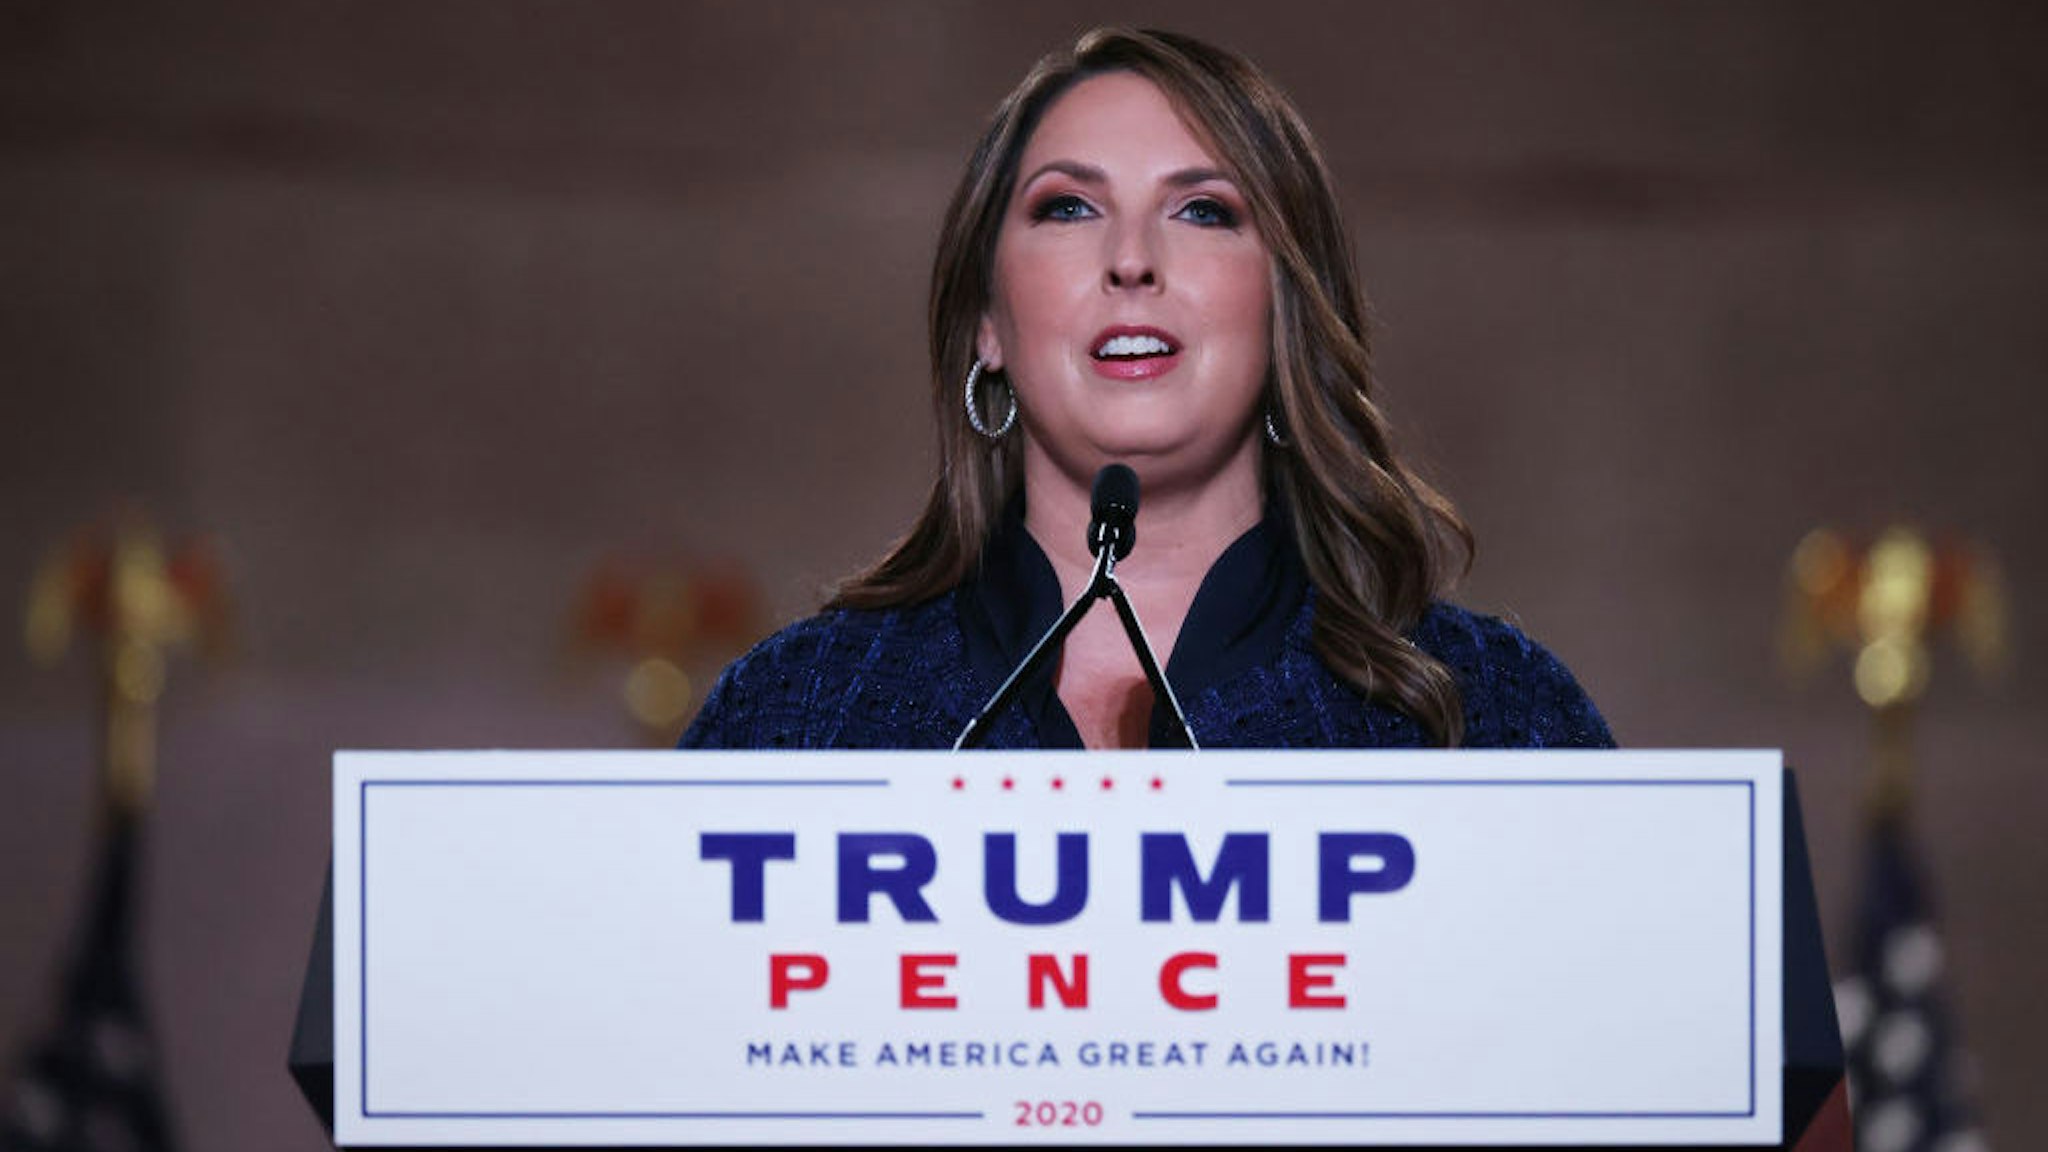 WASHINGTON, DC - AUGUST 24: Chair of the Republican National Committee Ronna McDaniel stands on stage in an empty Mellon Auditorium while addressing the Republican National Convention at the Mellon Auditorium on August 24, 2020 in Washington, DC. The novel coronavirus pandemic has forced the Republican Party to move away from an in-person convention to a televised format, similar to the Democratic Party's convention a week earlier. (Photo by Chip Somodevilla/Getty Images)